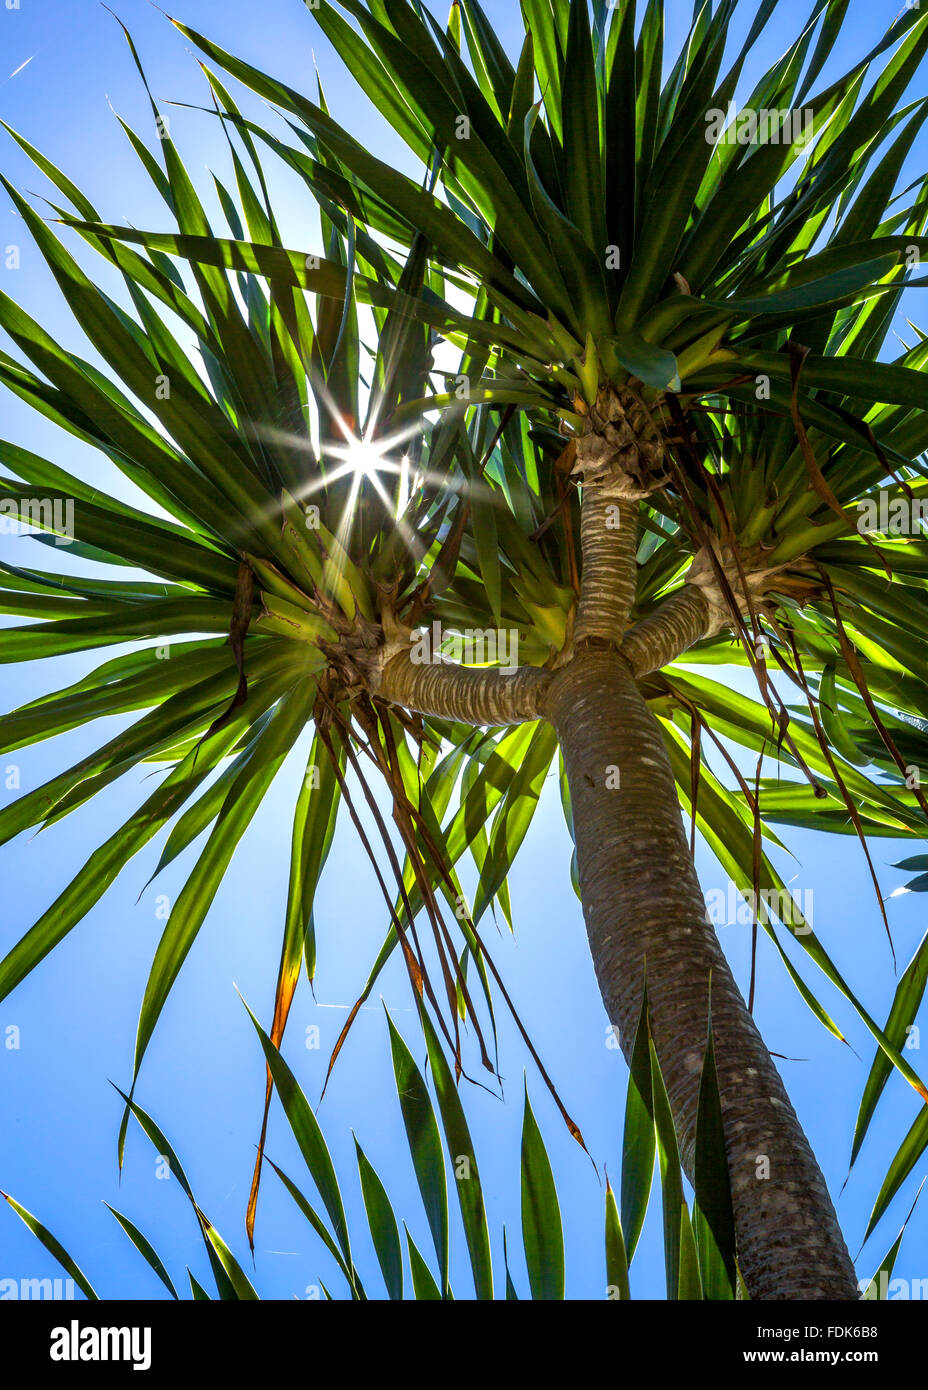 Low angle view of a Palm tree, Bali, Indonesia Stock Photo